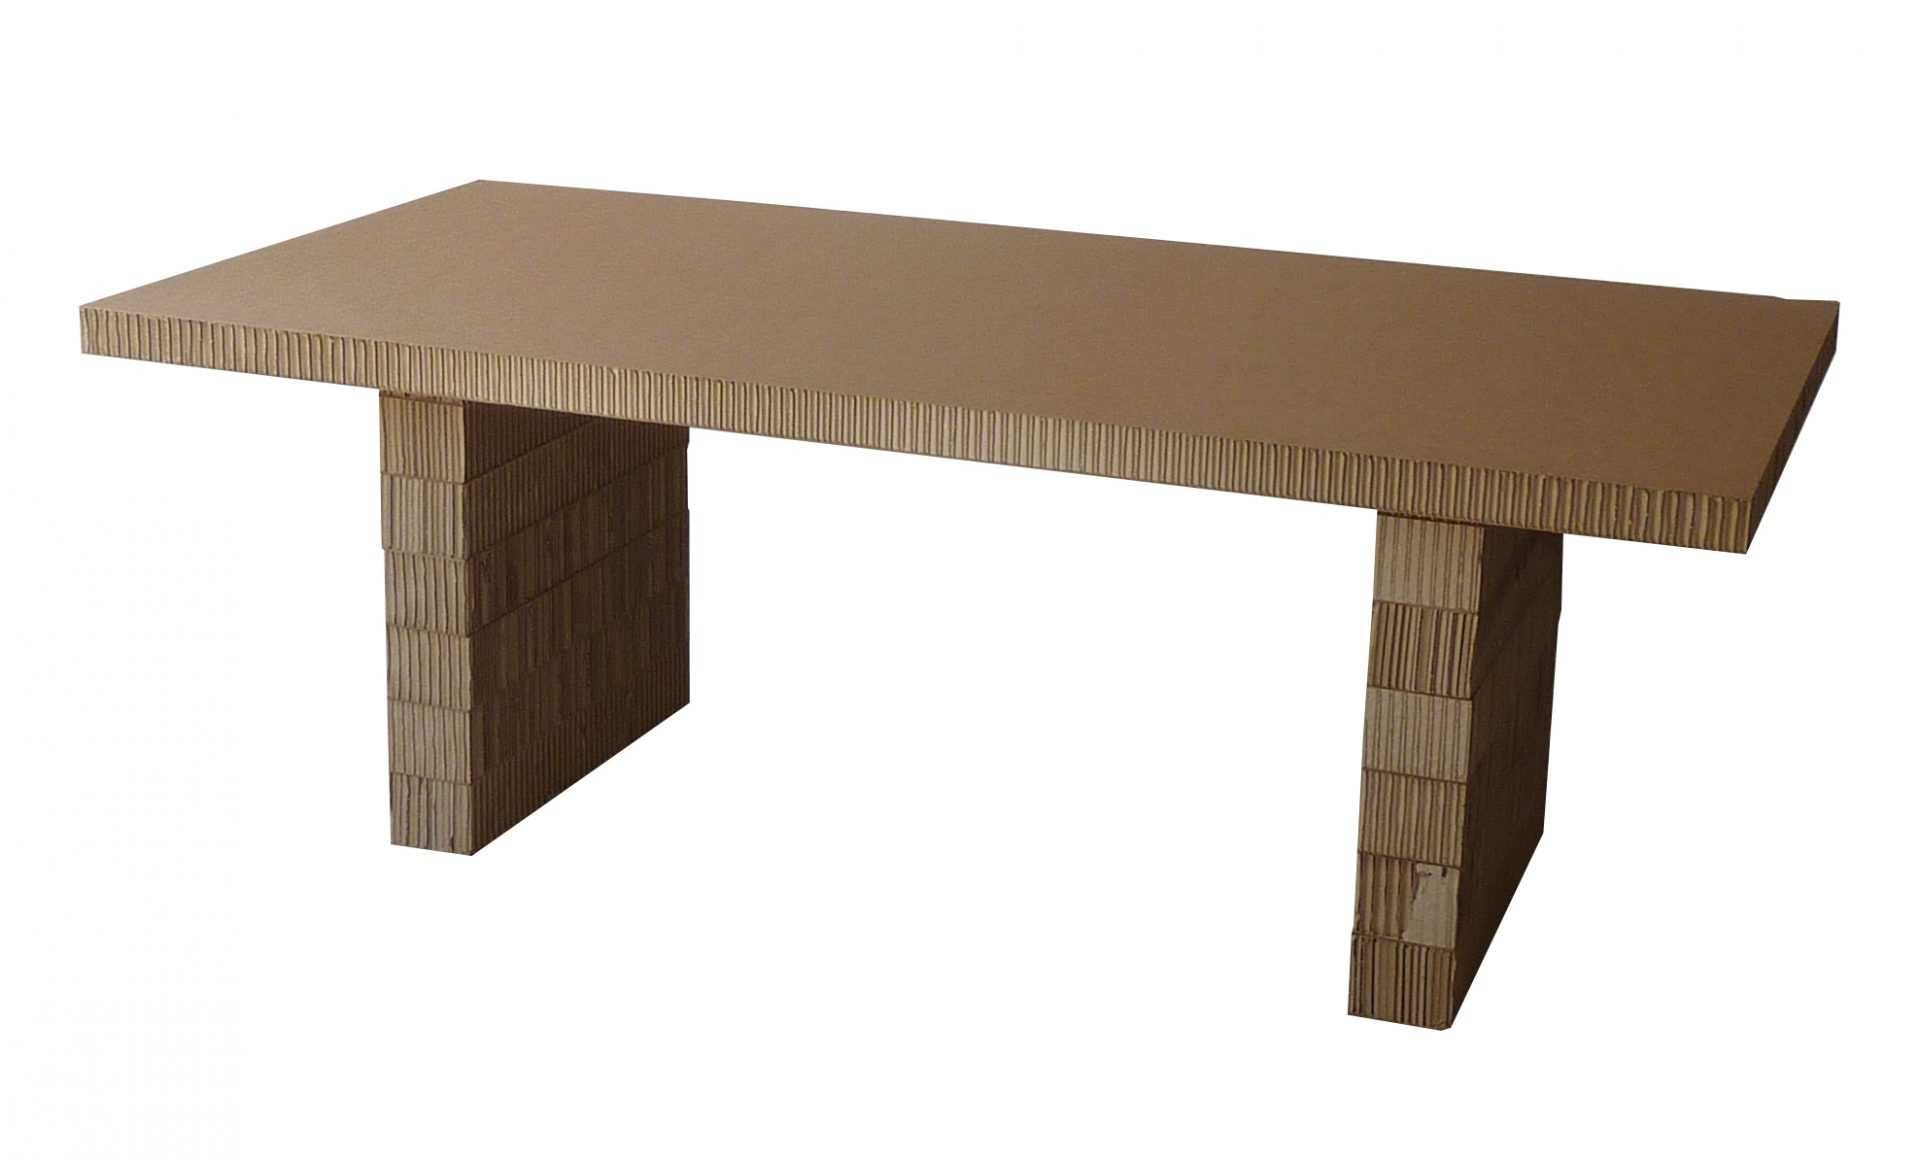 specially designed cardboard tables